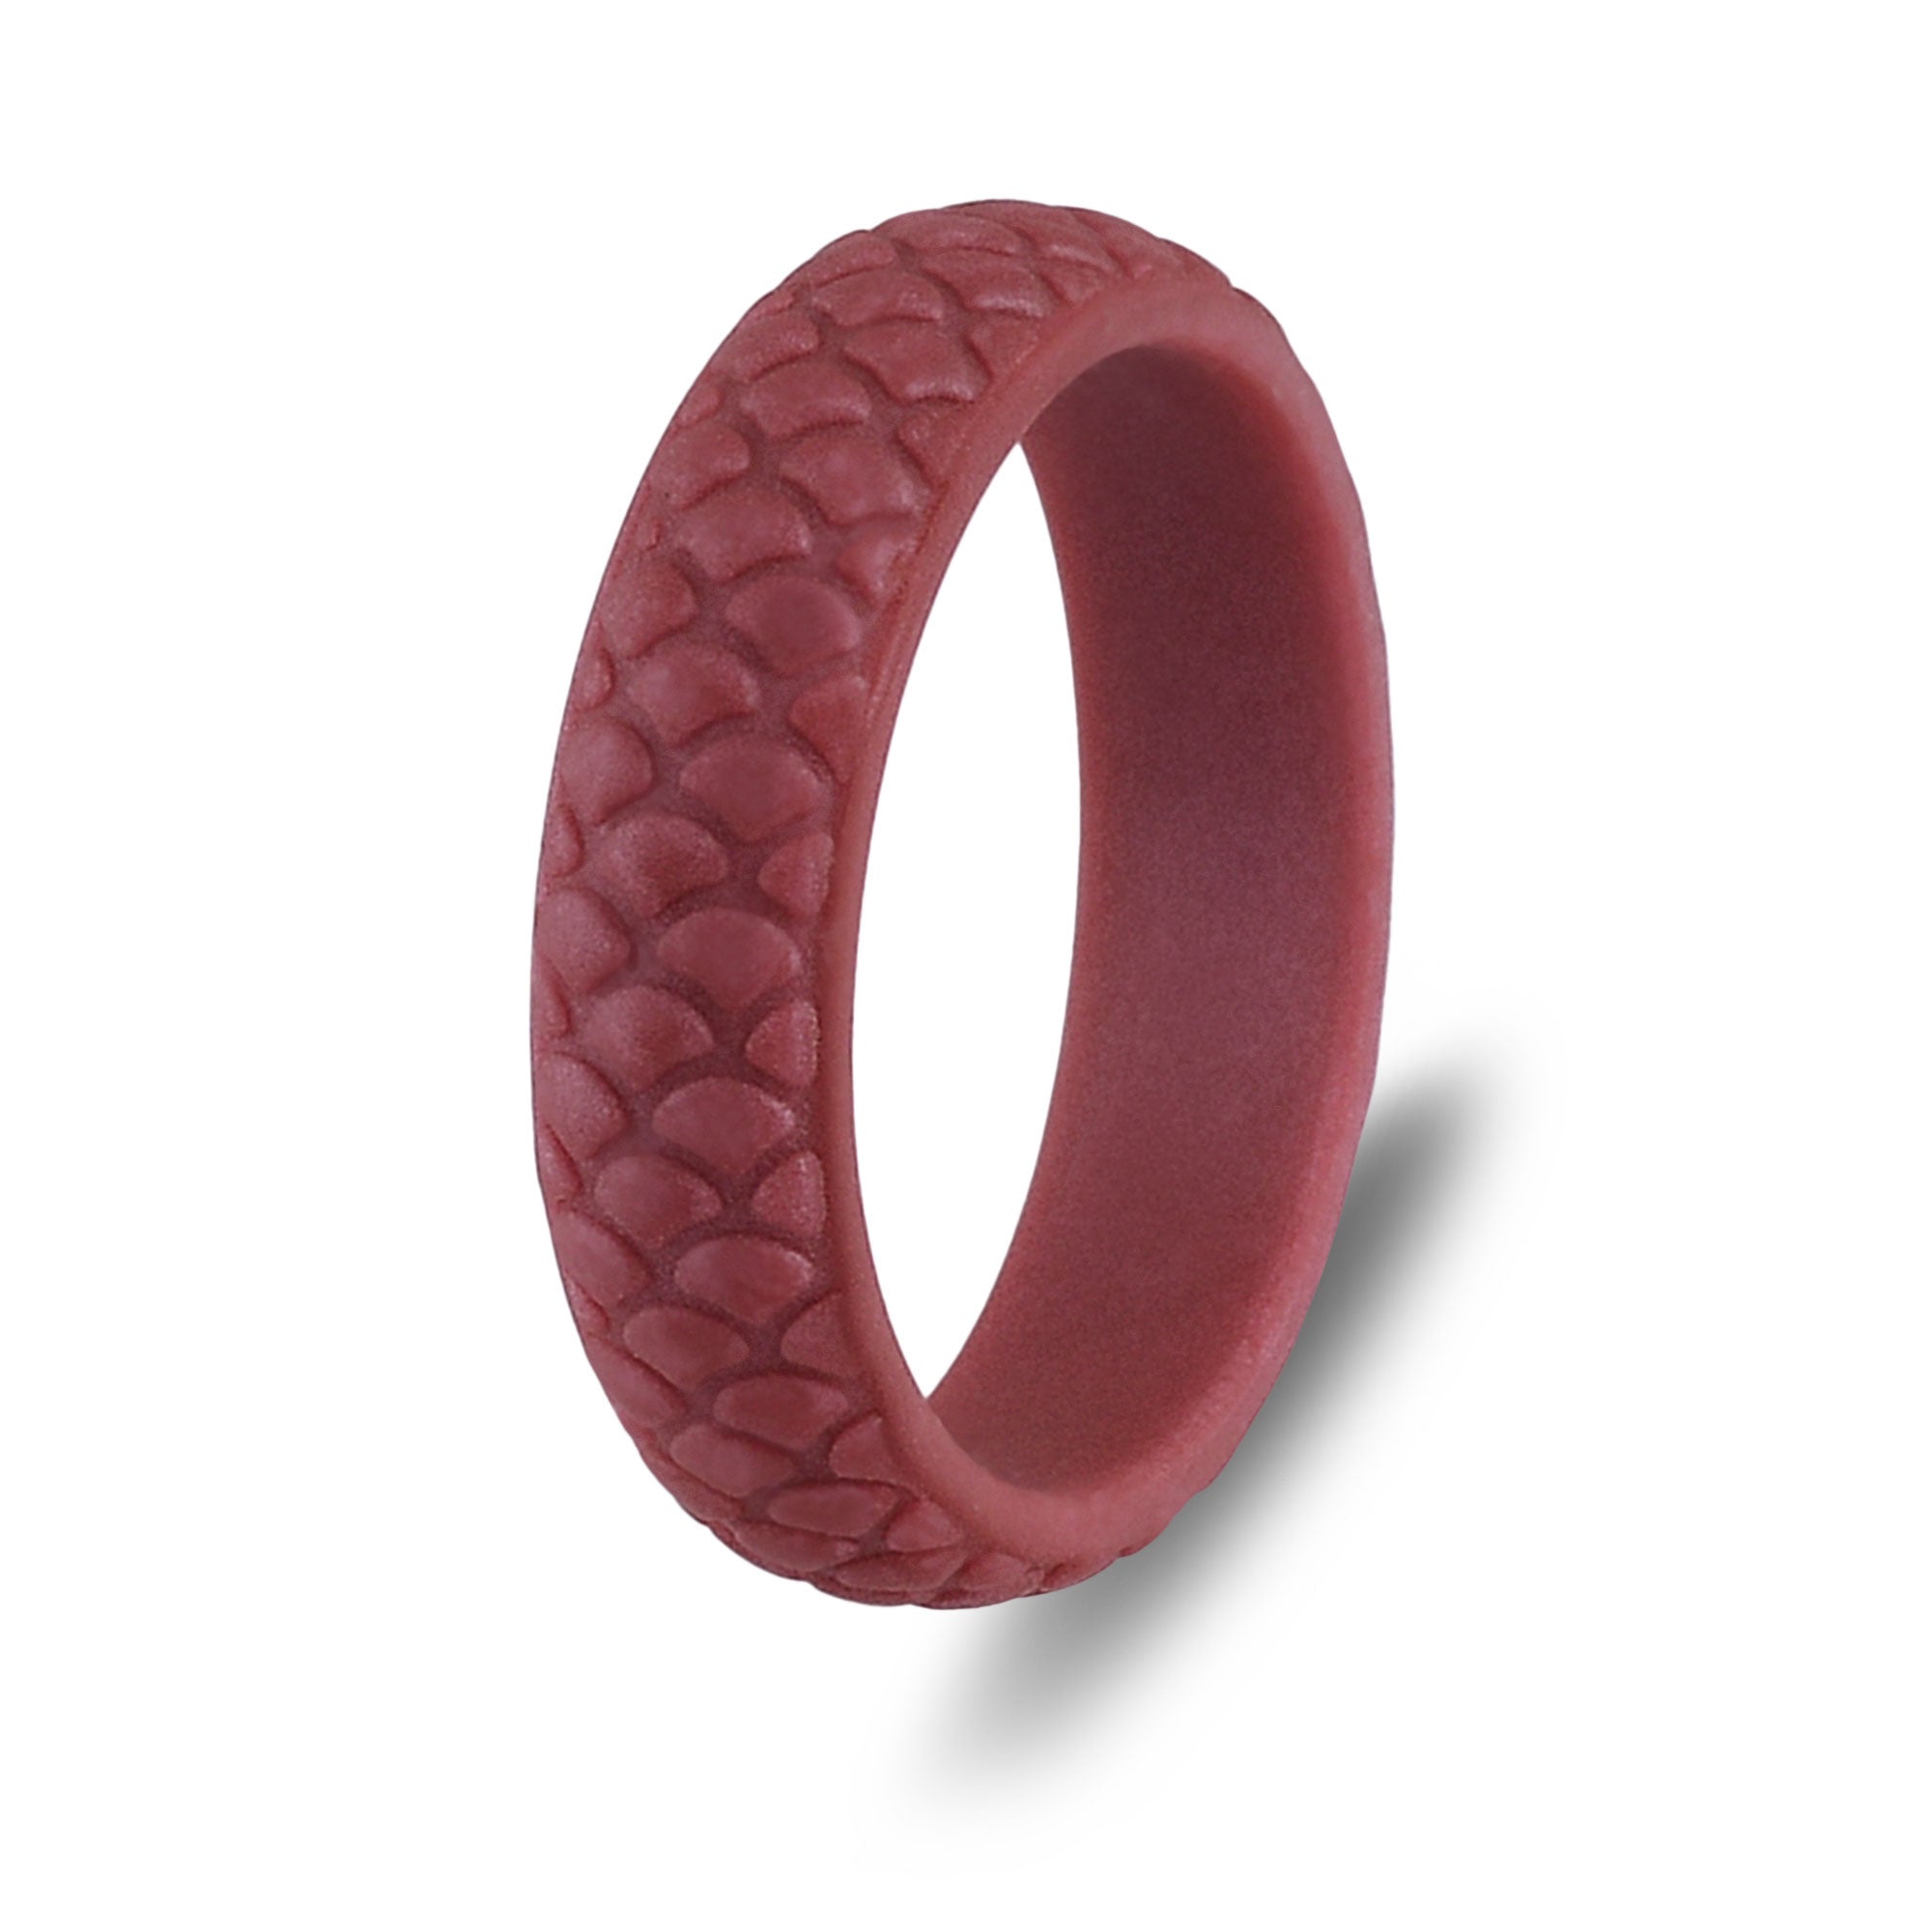 The Ruby Reef - Silicone Ring